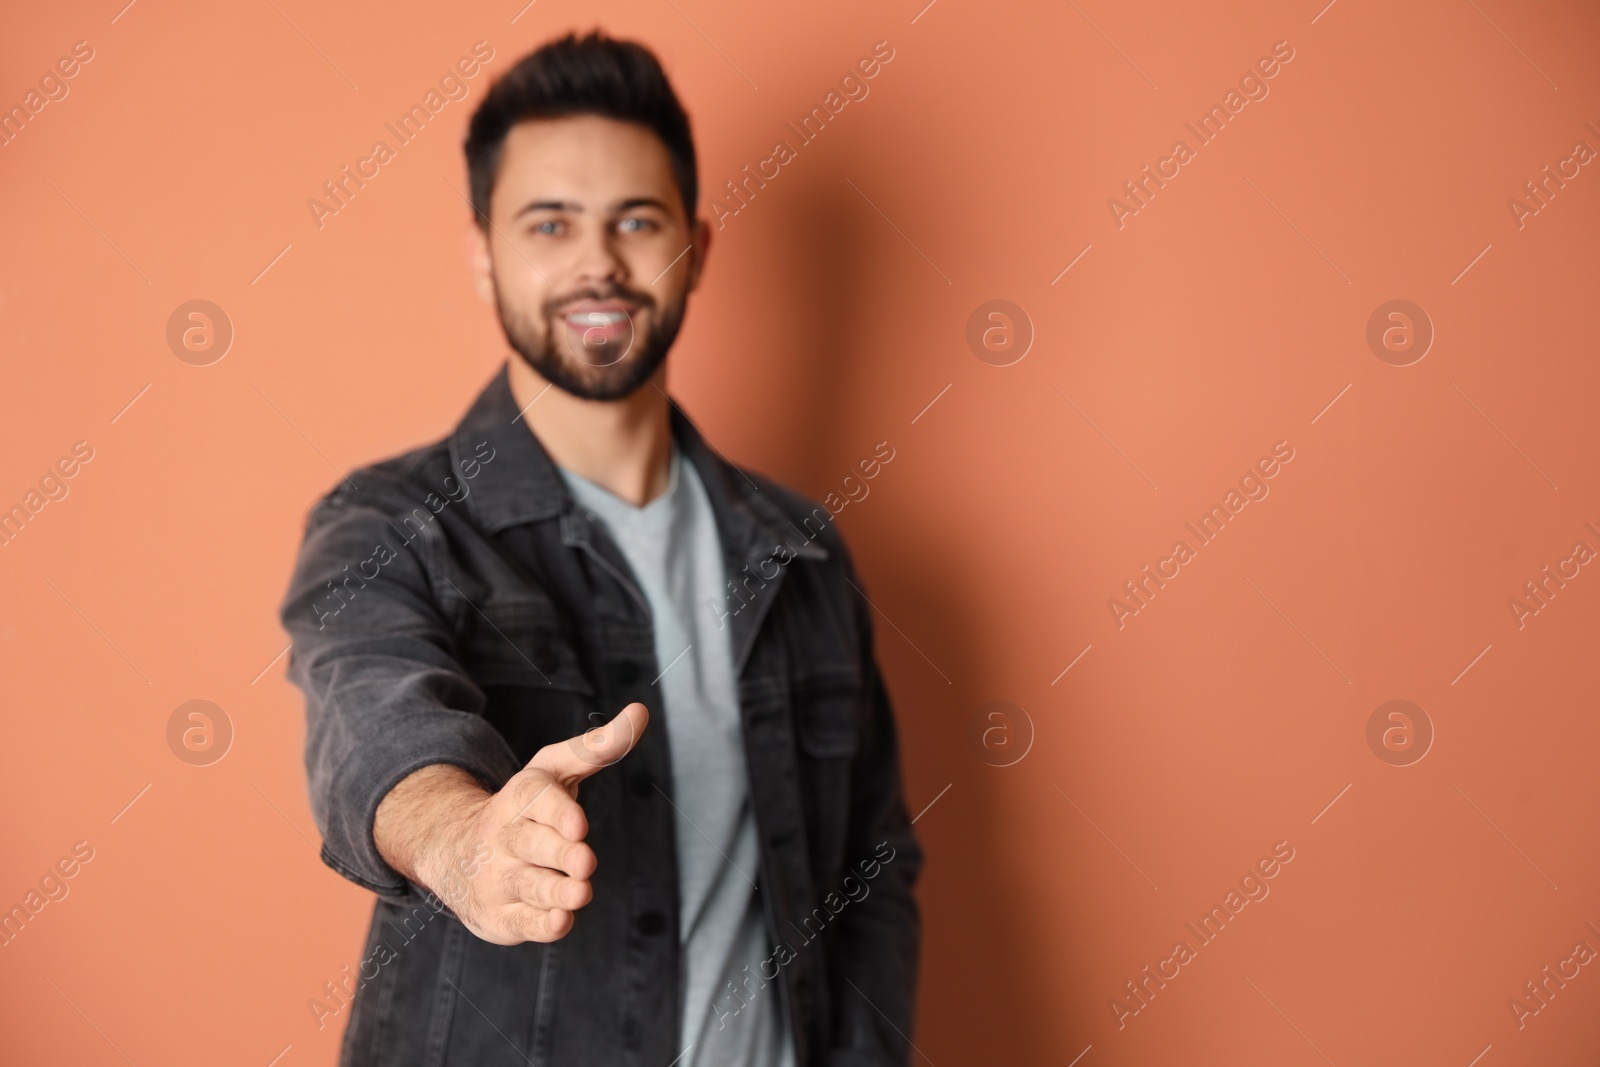 Photo of Man offering handshake against peach background, focus on hand. Space for text